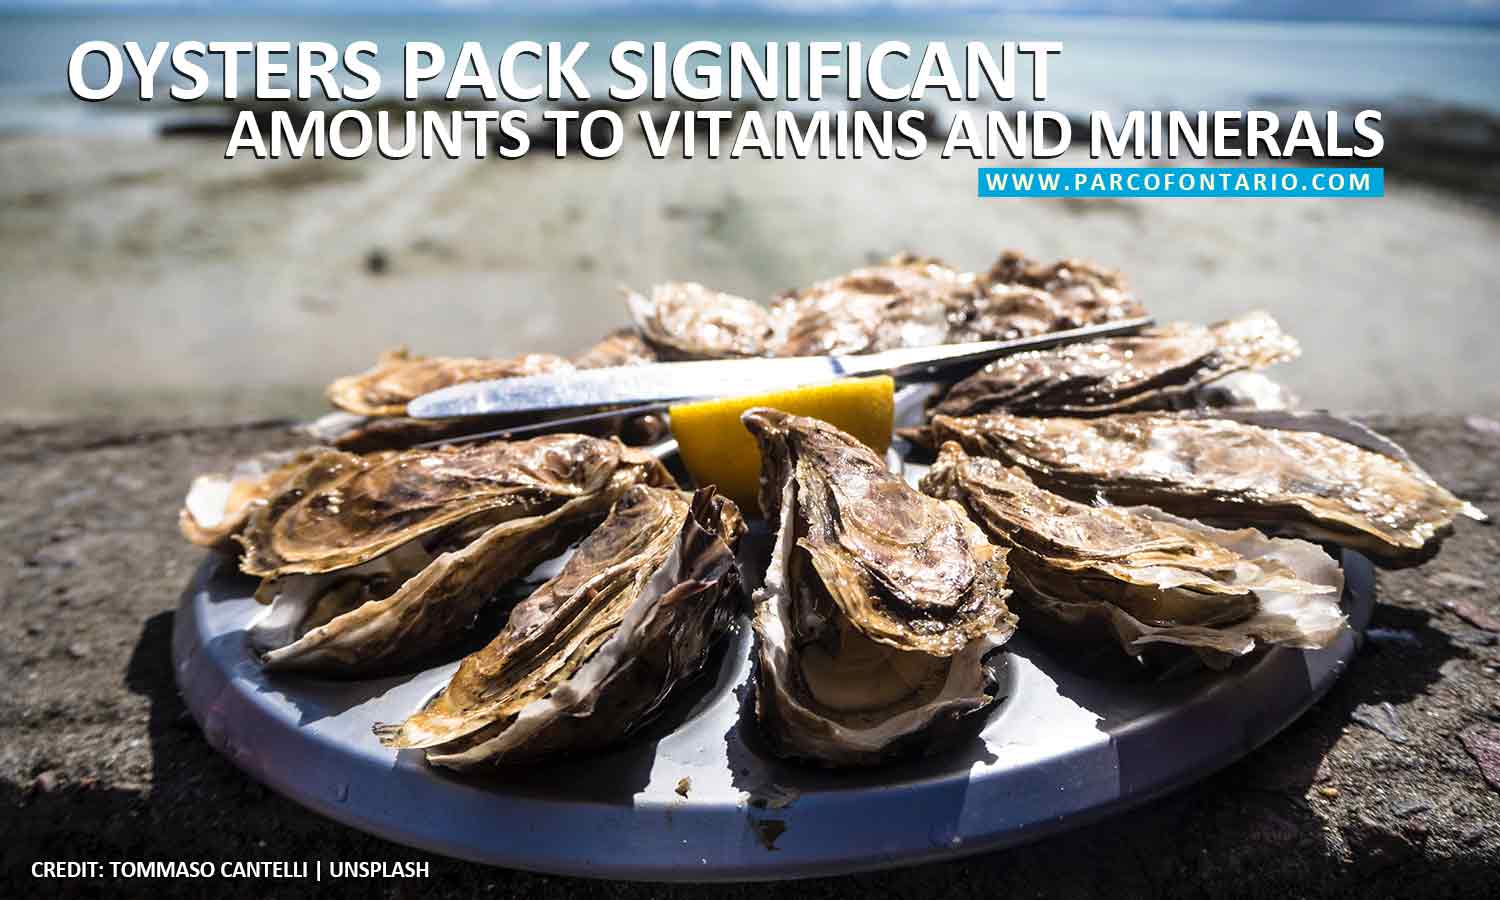 Oysters pack significant amounts to vitamins and minerals